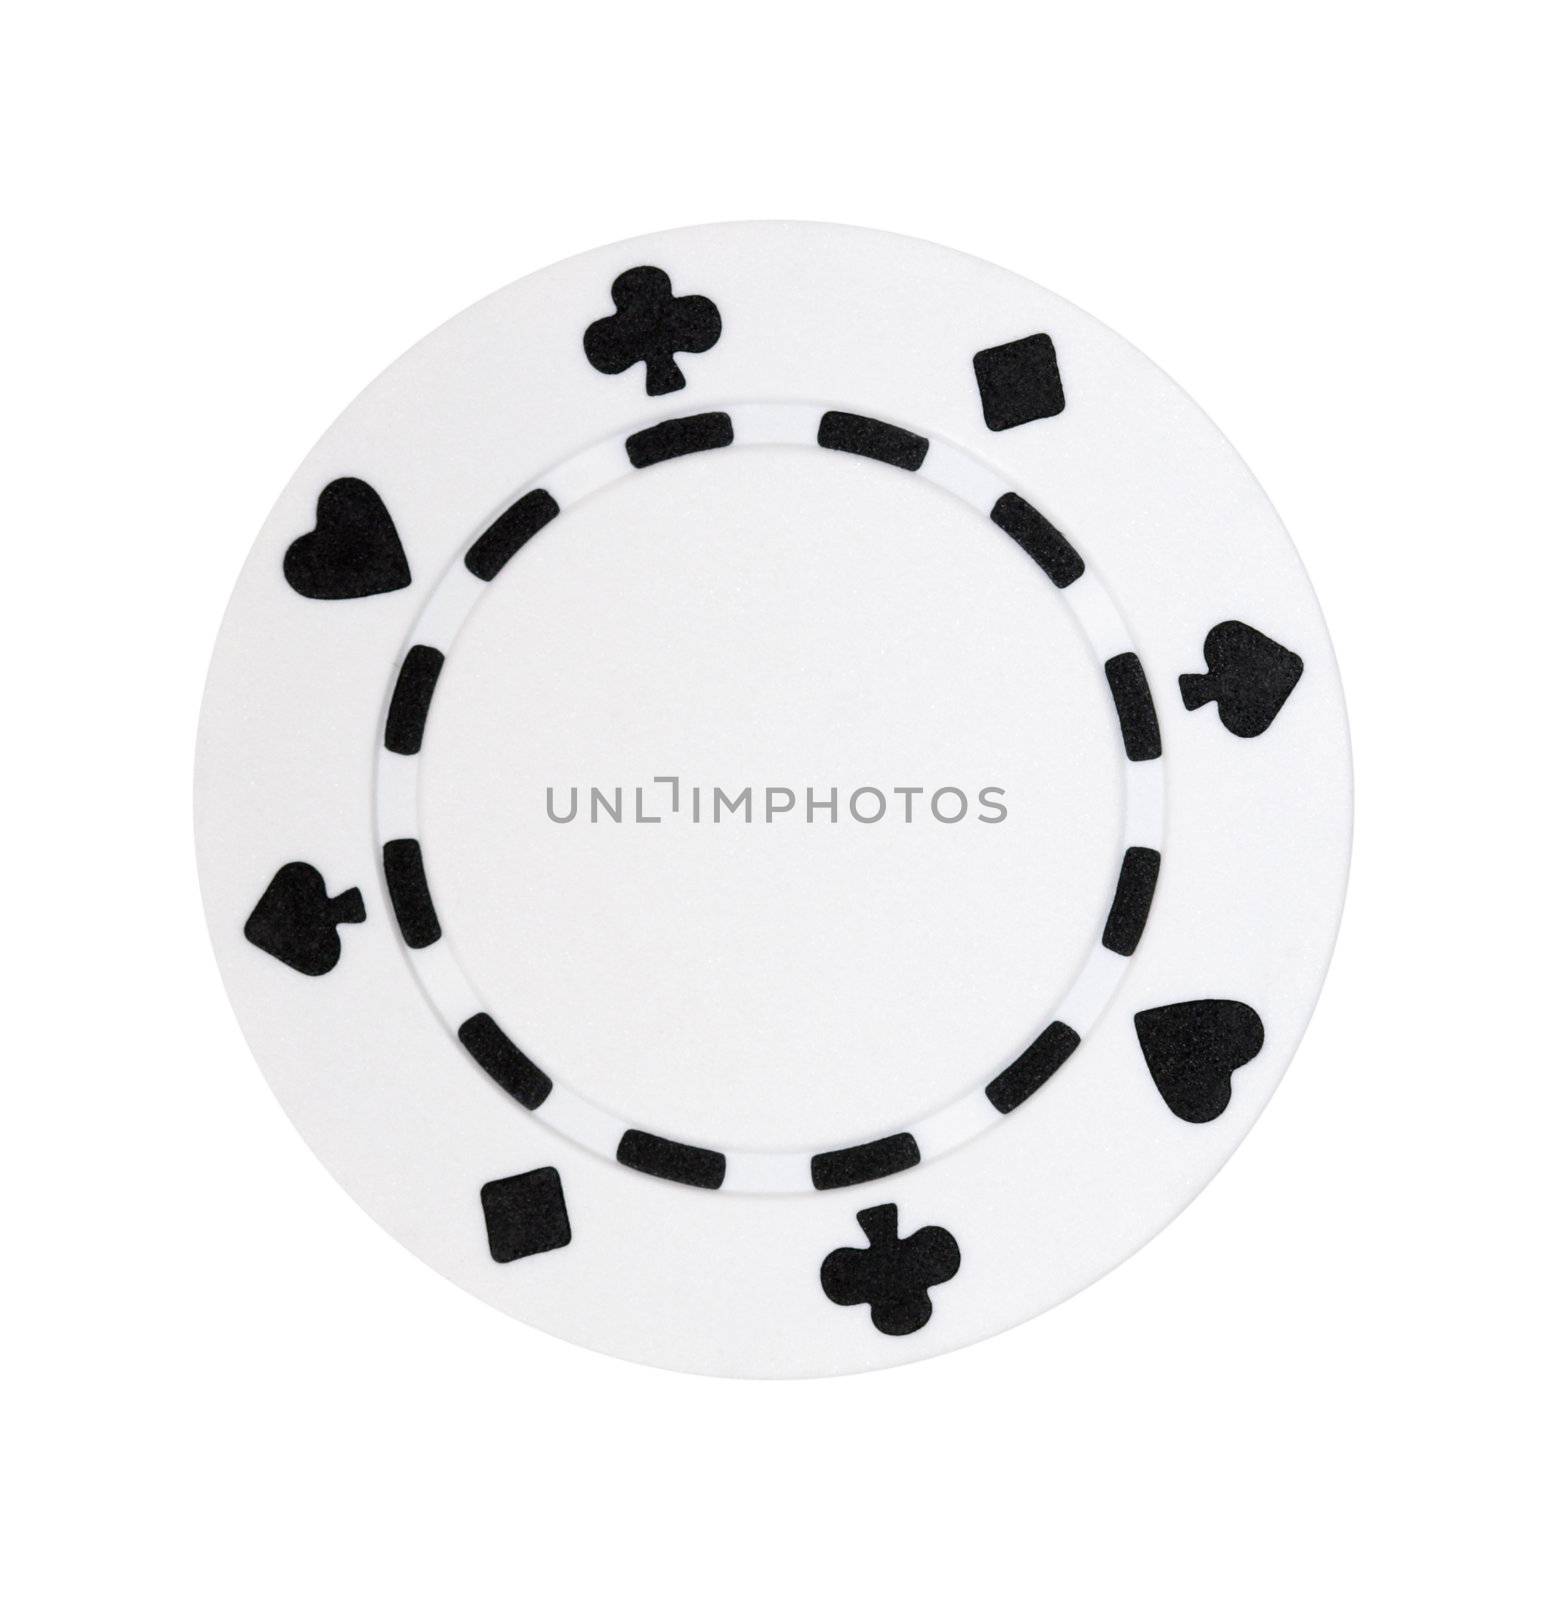 A white poker chip isolated on a white background